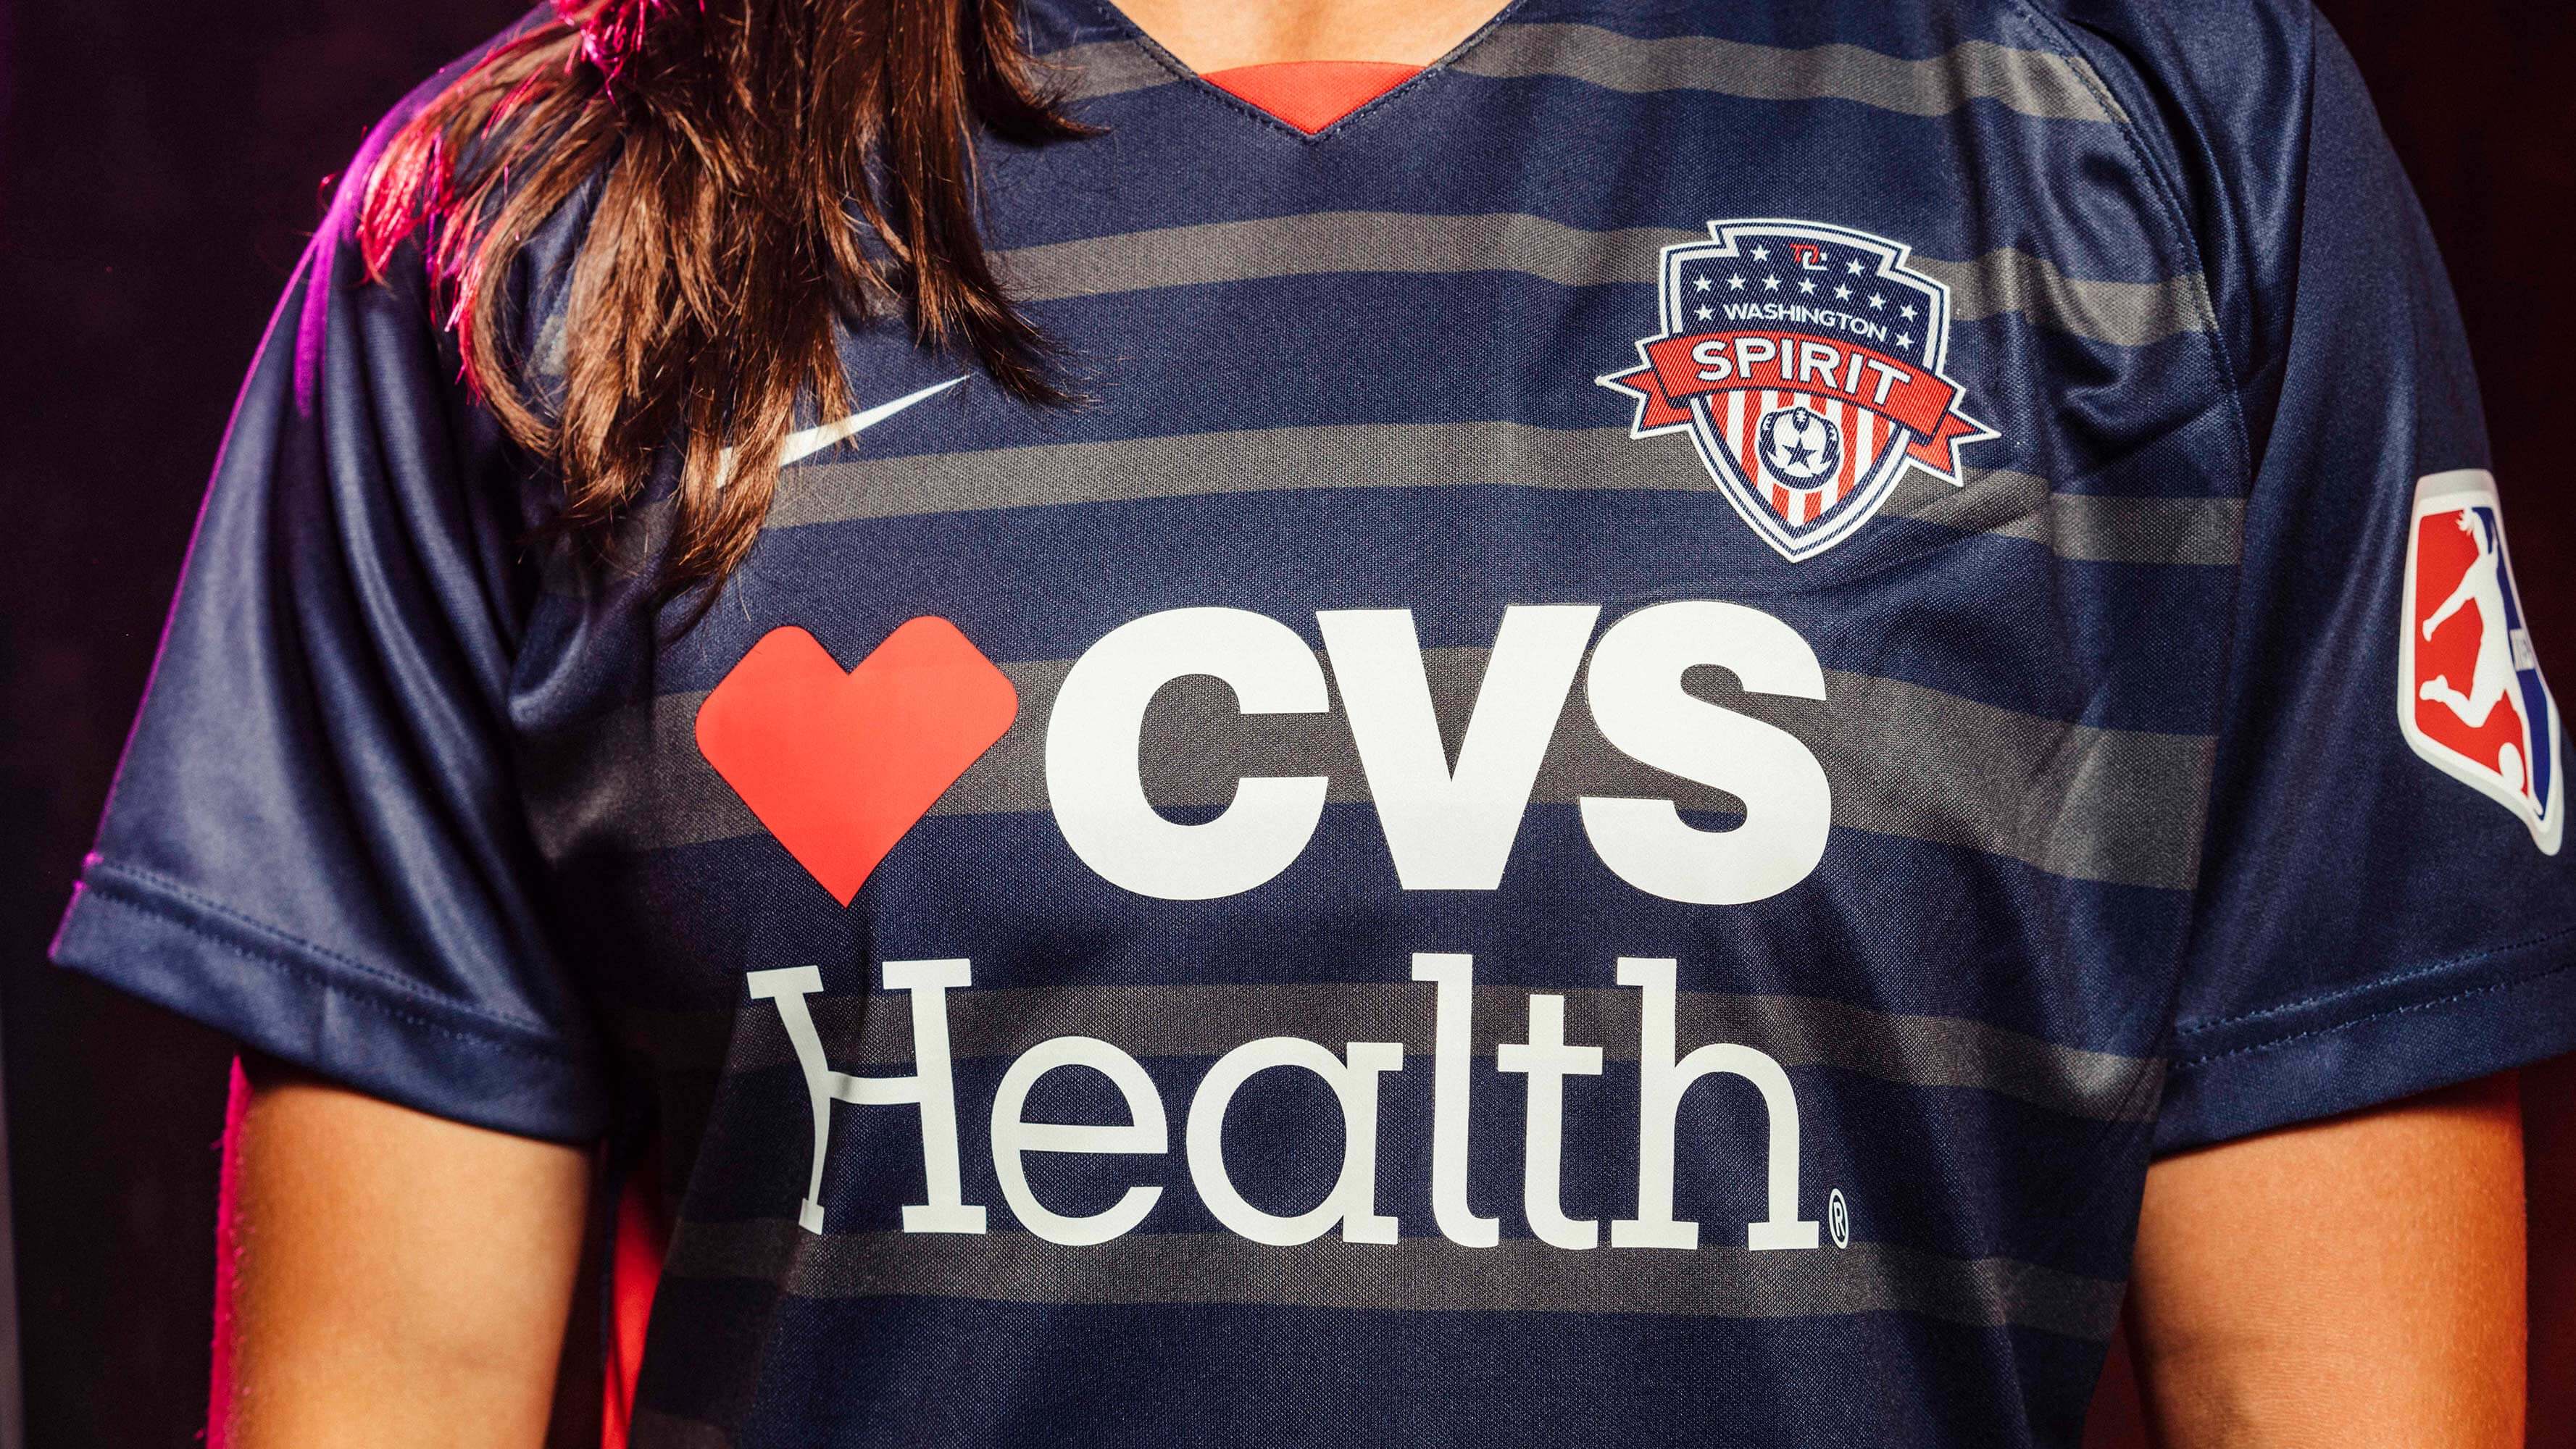 A close up photo of the Washington Spirit (professional soccer team) uniforms, which are dark navy blue and feature CVS Health&#039;s logo on the front under the soccer team&#039;s branding.